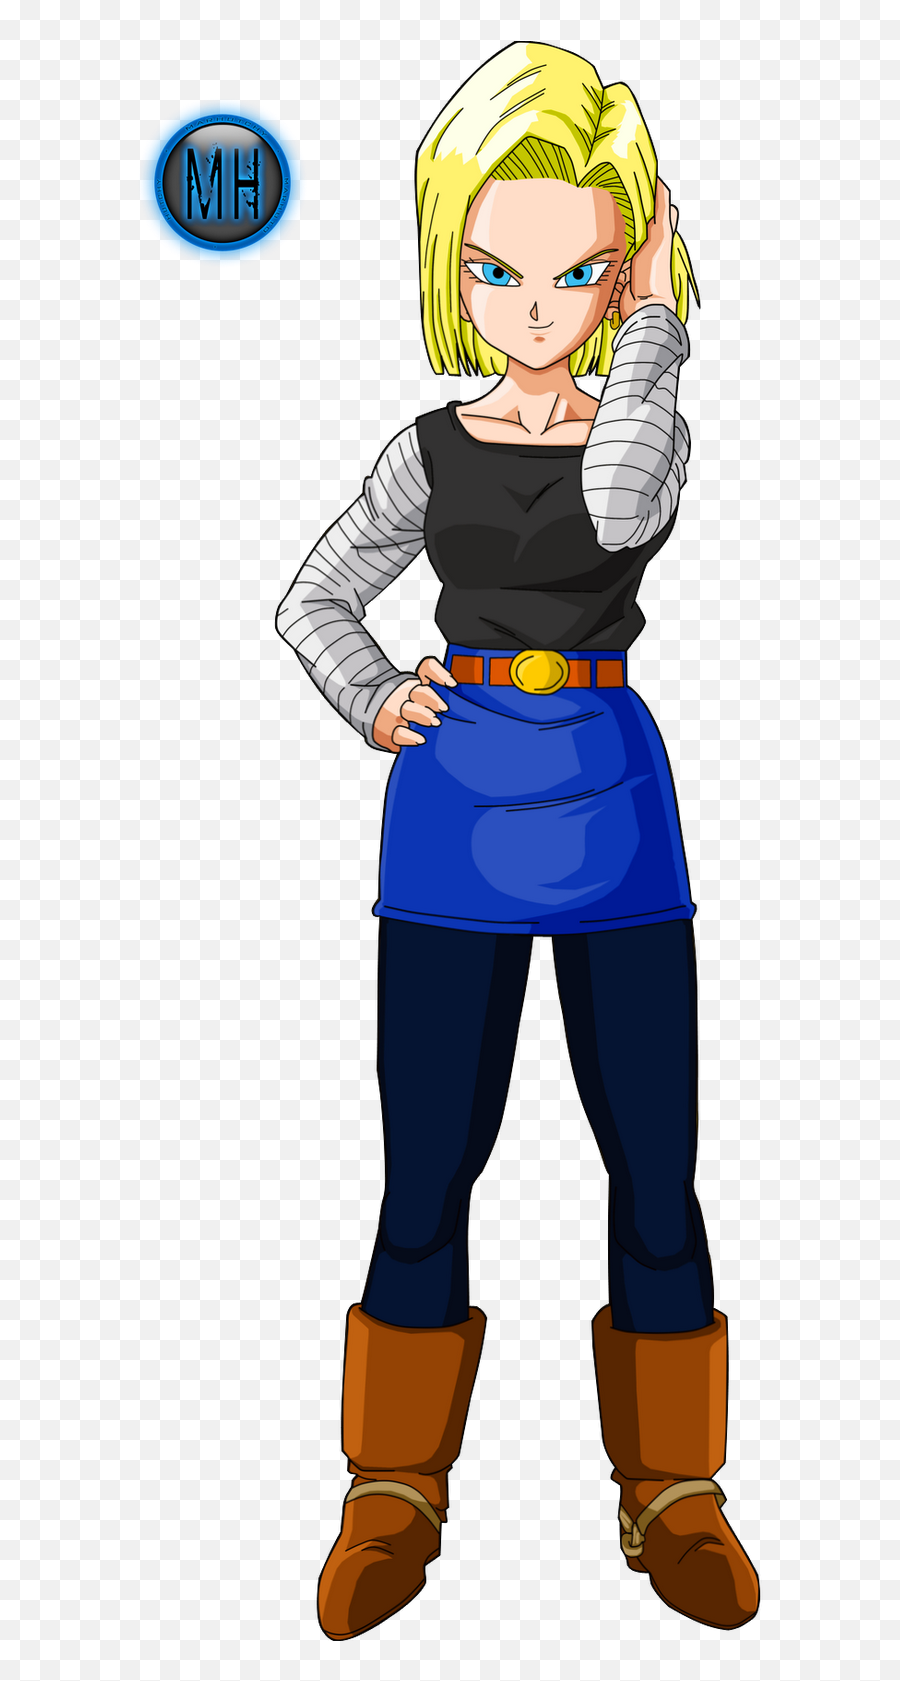 Png - Android 18 Emoji,Android 18 Png